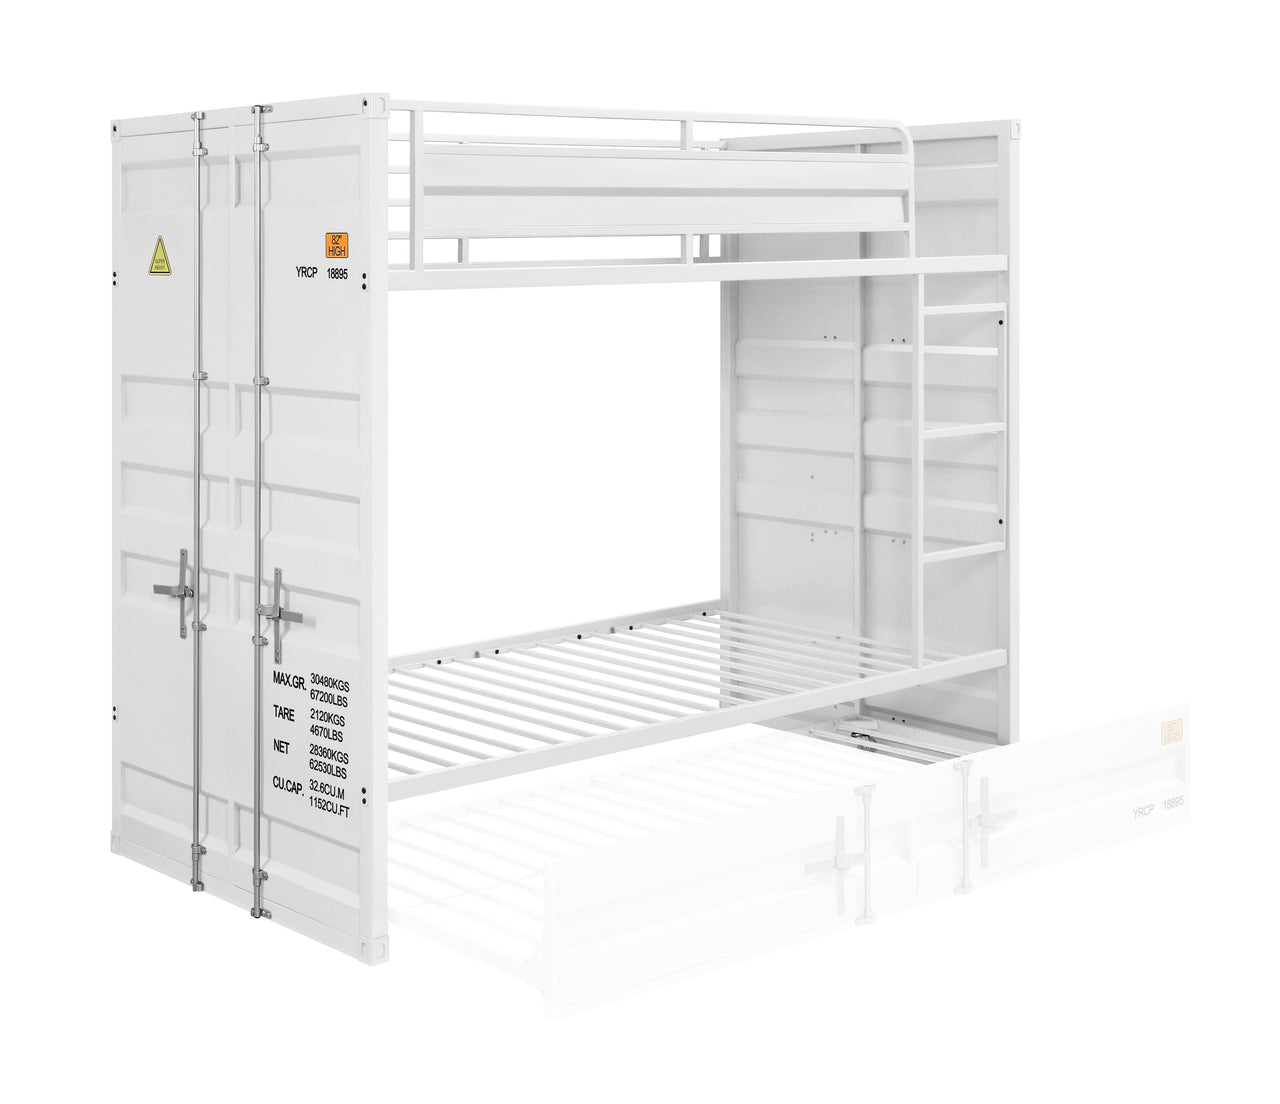 Cargo - Industrial - Bunk Bed - Tony's Home Furnishings